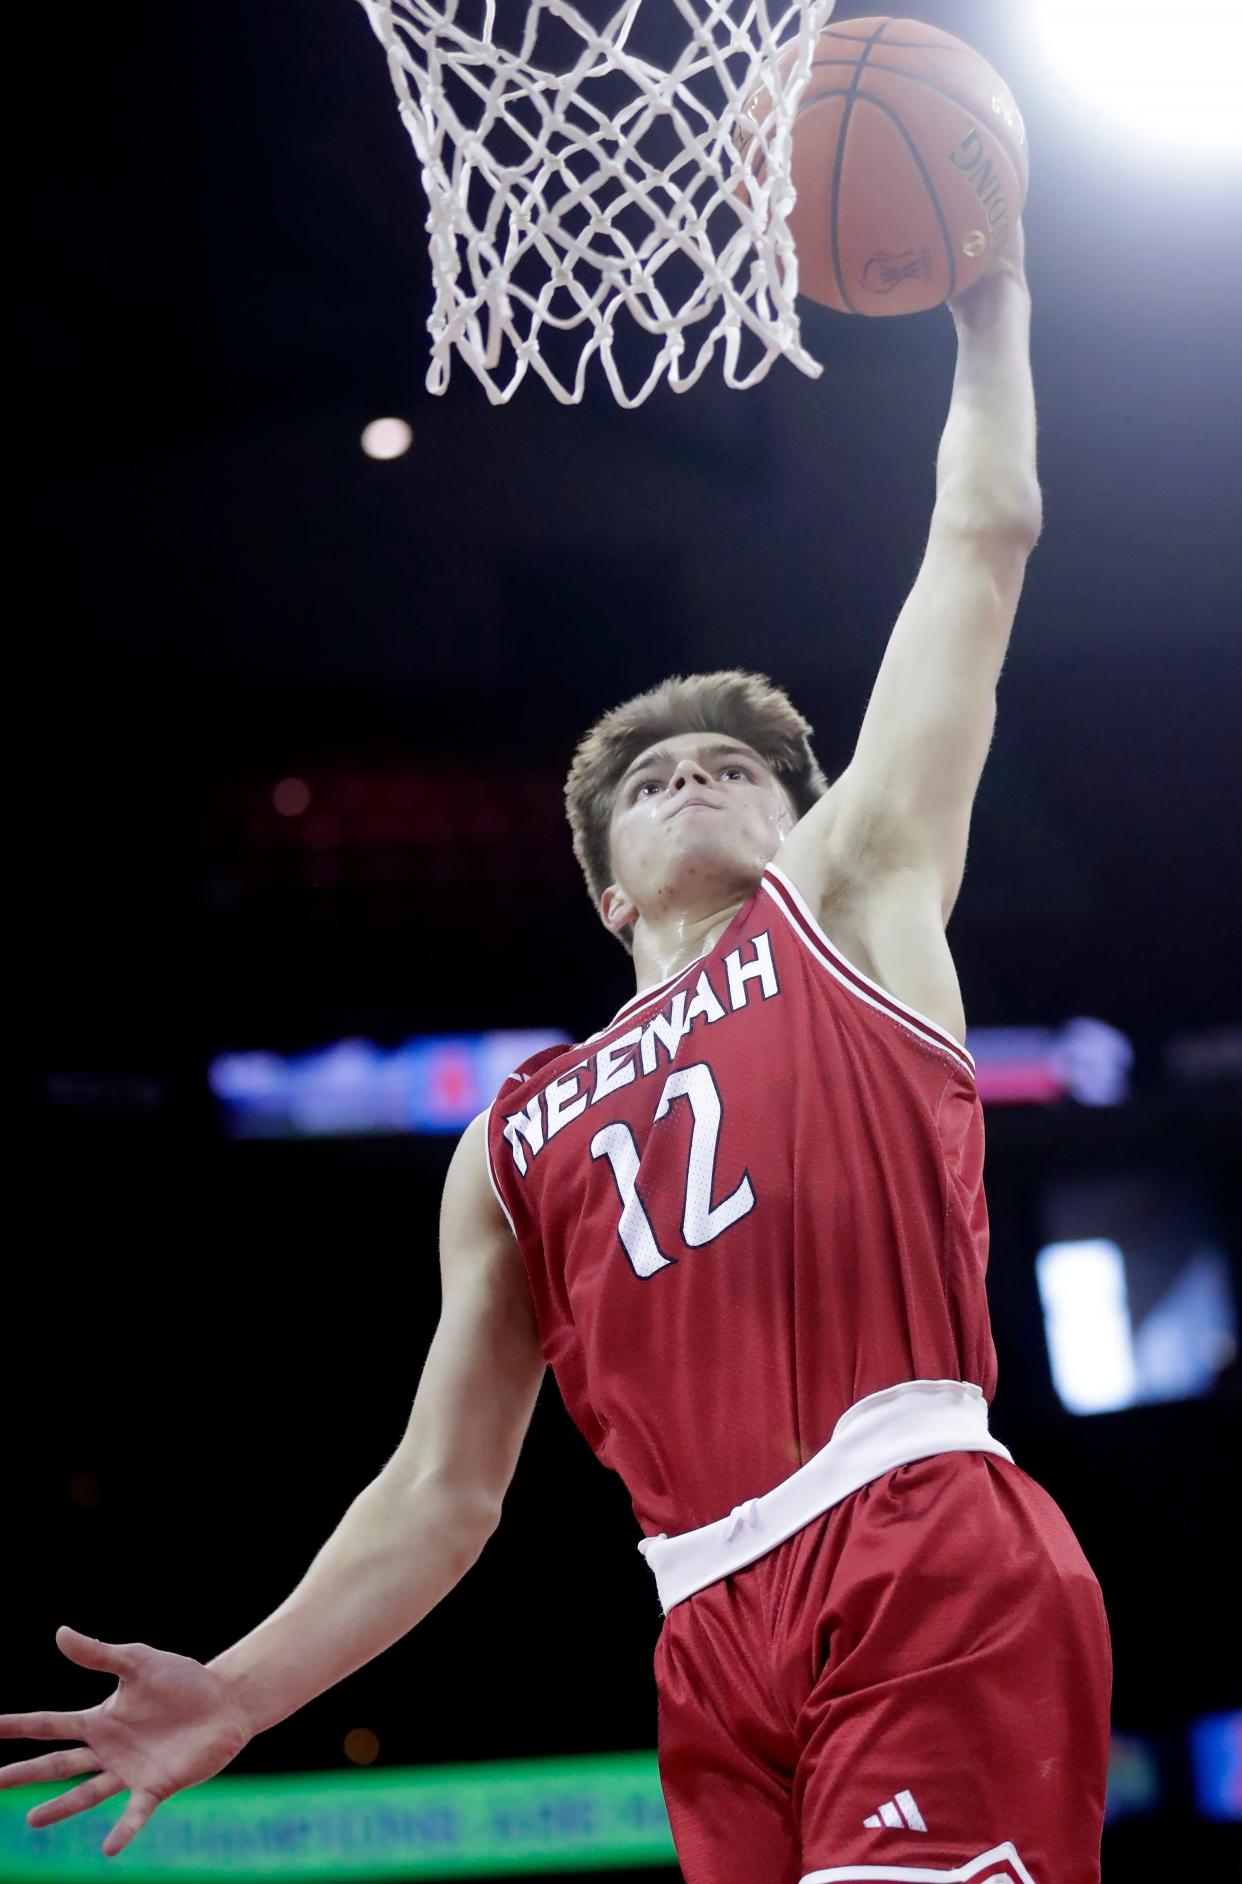 Neenah's Brady Corso averaged 22 points and 5 rebounds a game for the Rockets.